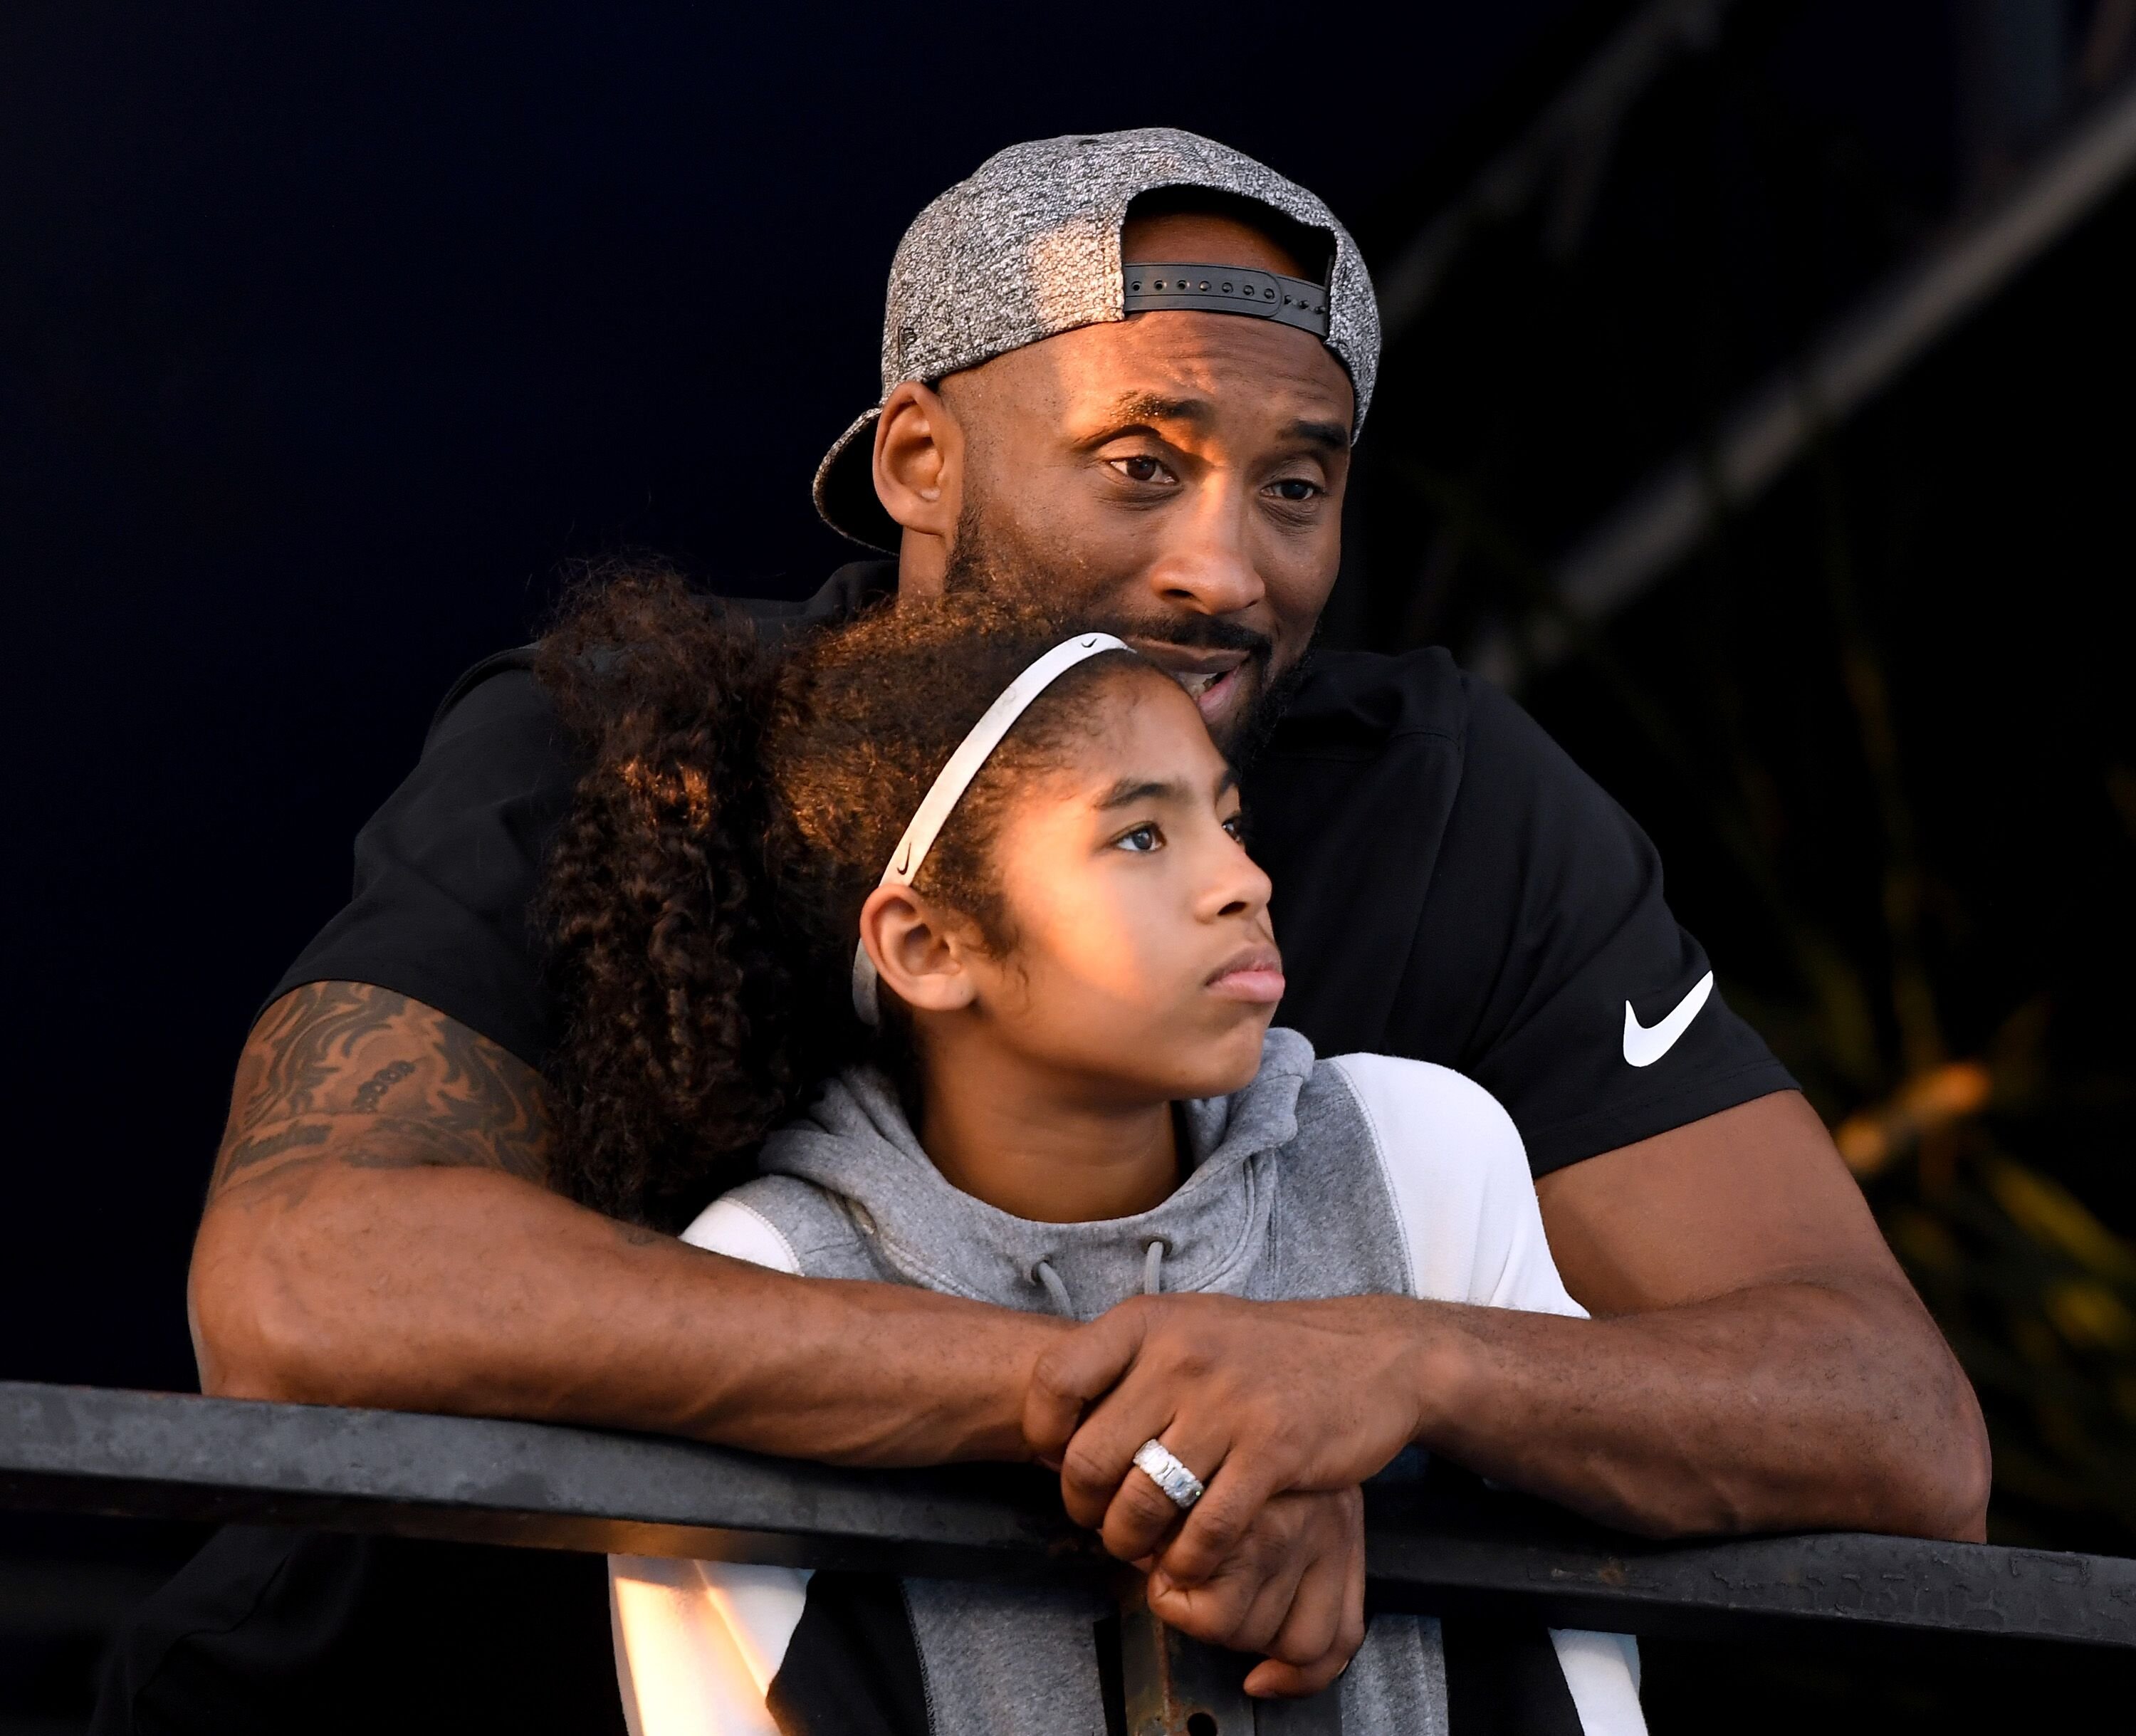 Kobe Bryant and daughter Gianna Bryant watch during day 2 of the Phillips 66 National Swimming Championships at the Woollett Aquatics Center | Photo: Getty Images